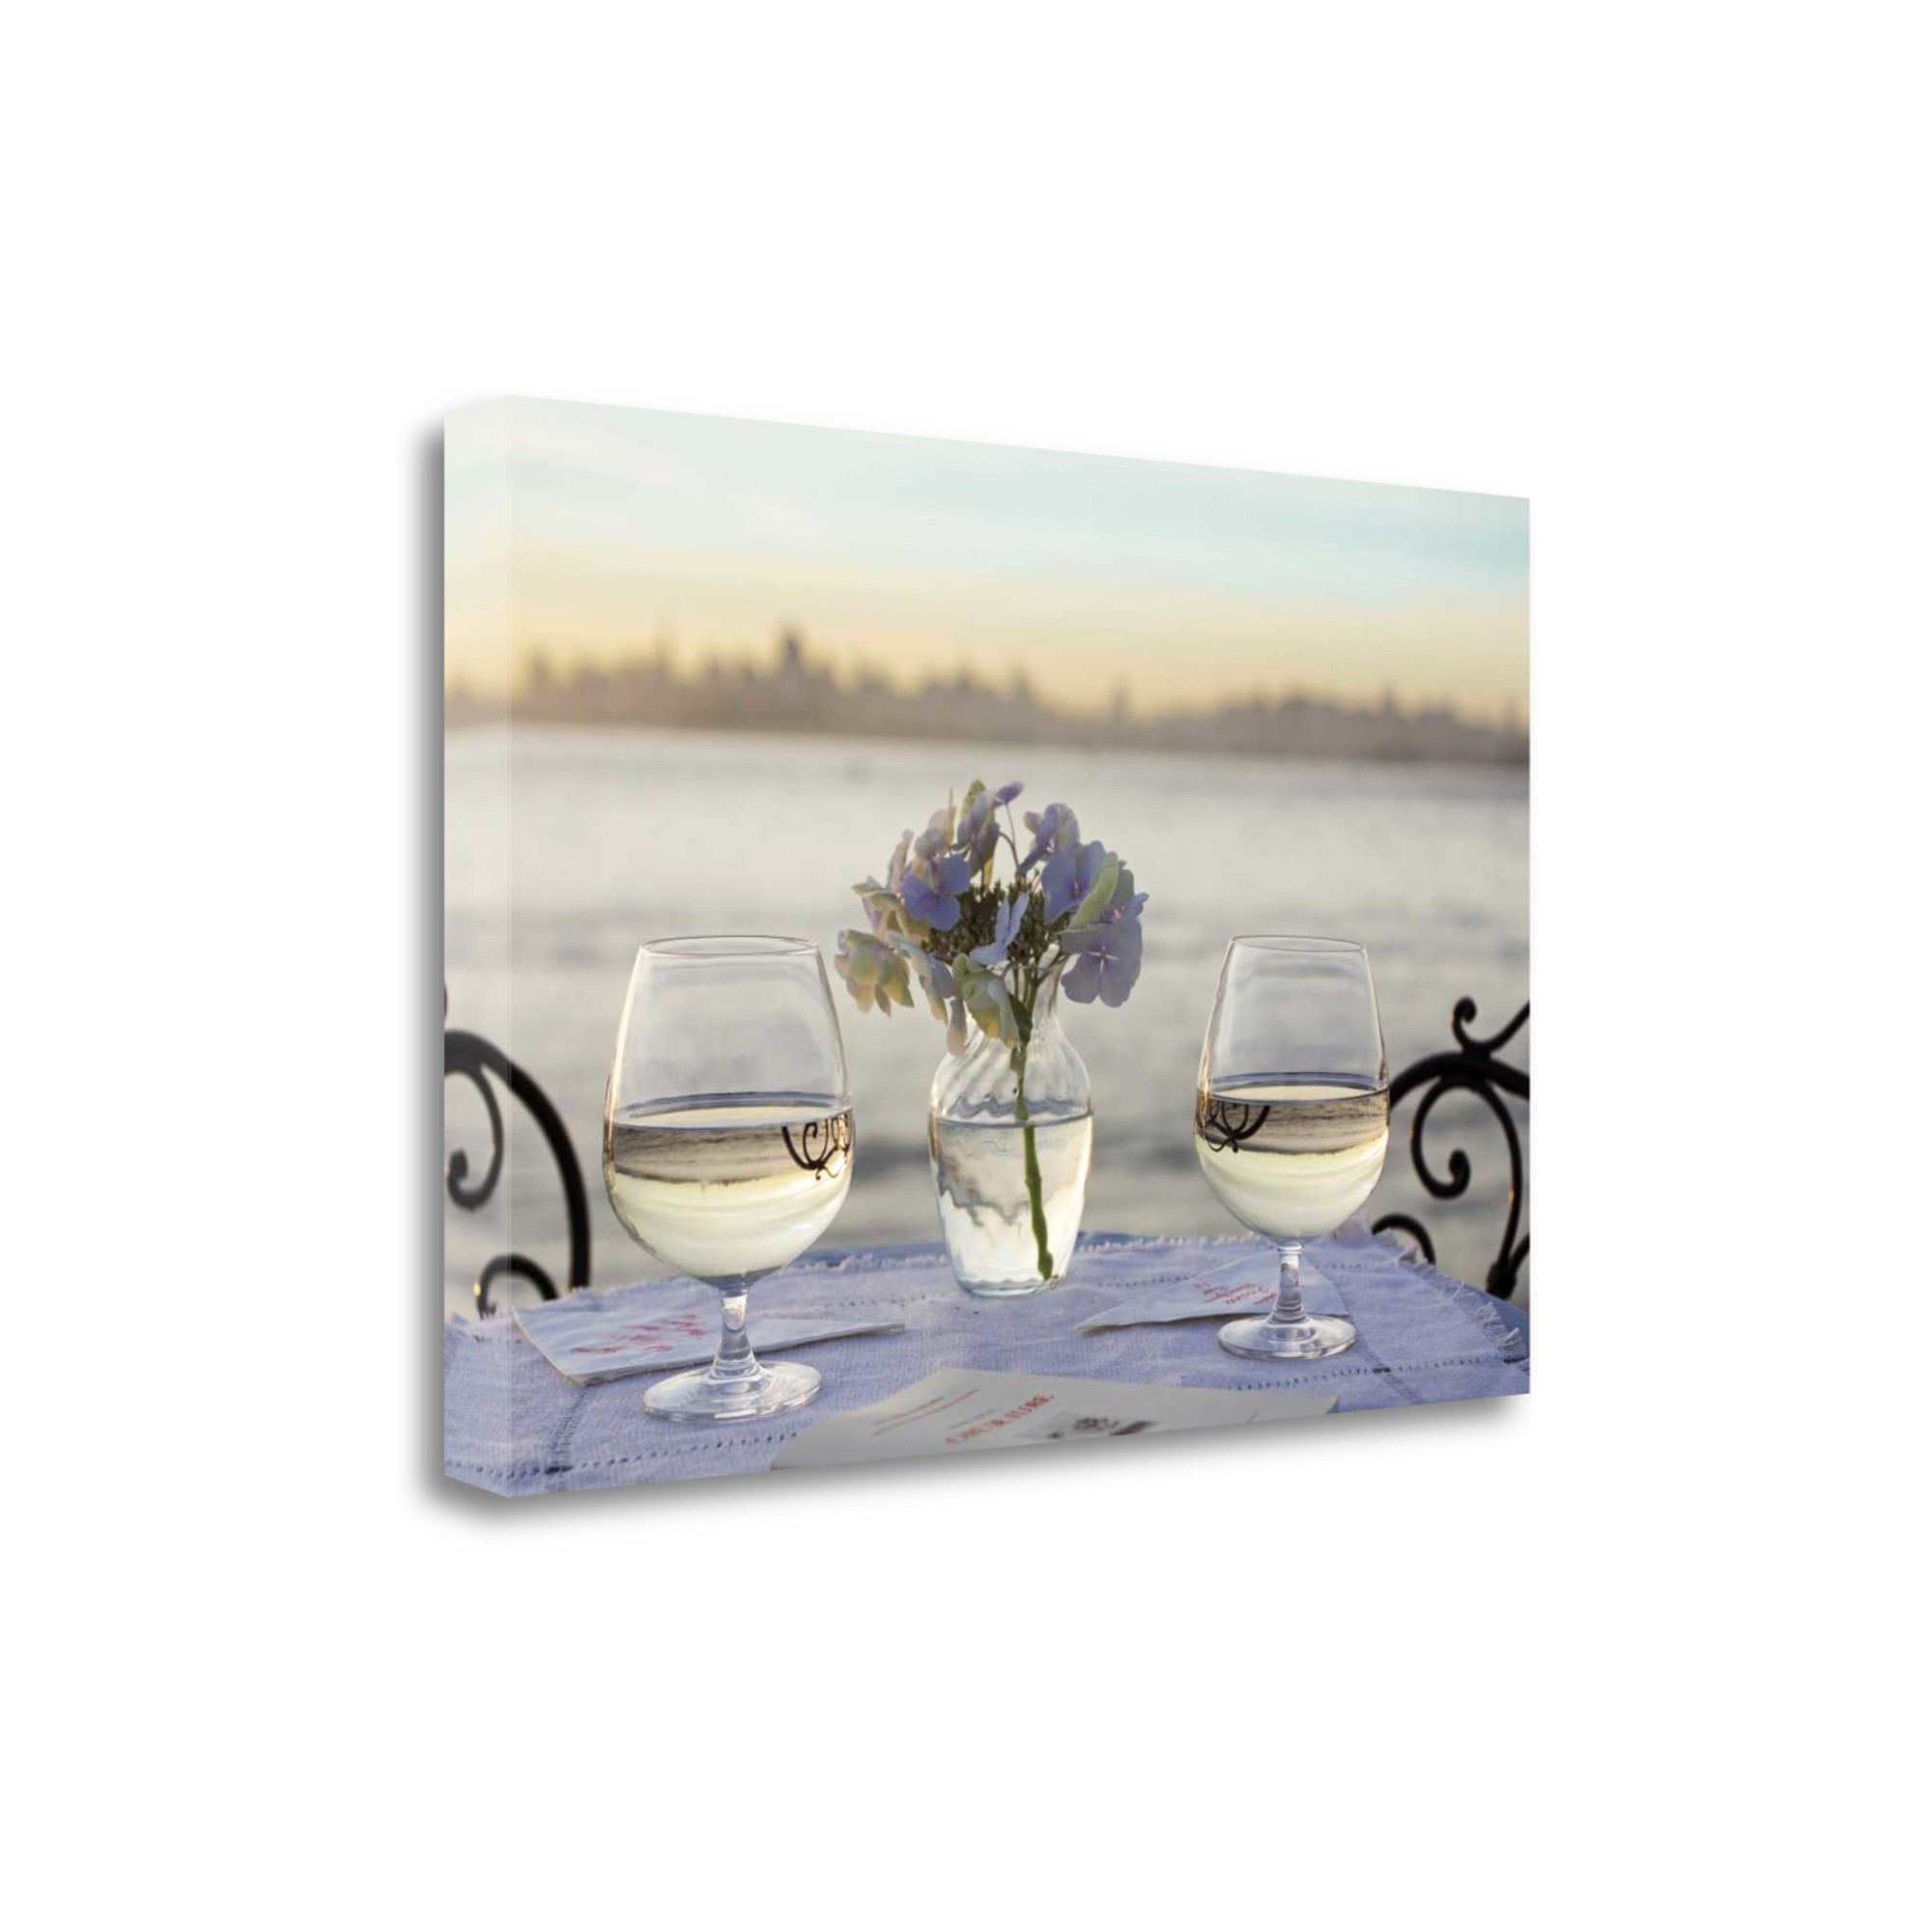 Water Glasses For Two City 2 Giclee Wrap Canvas Wall Art